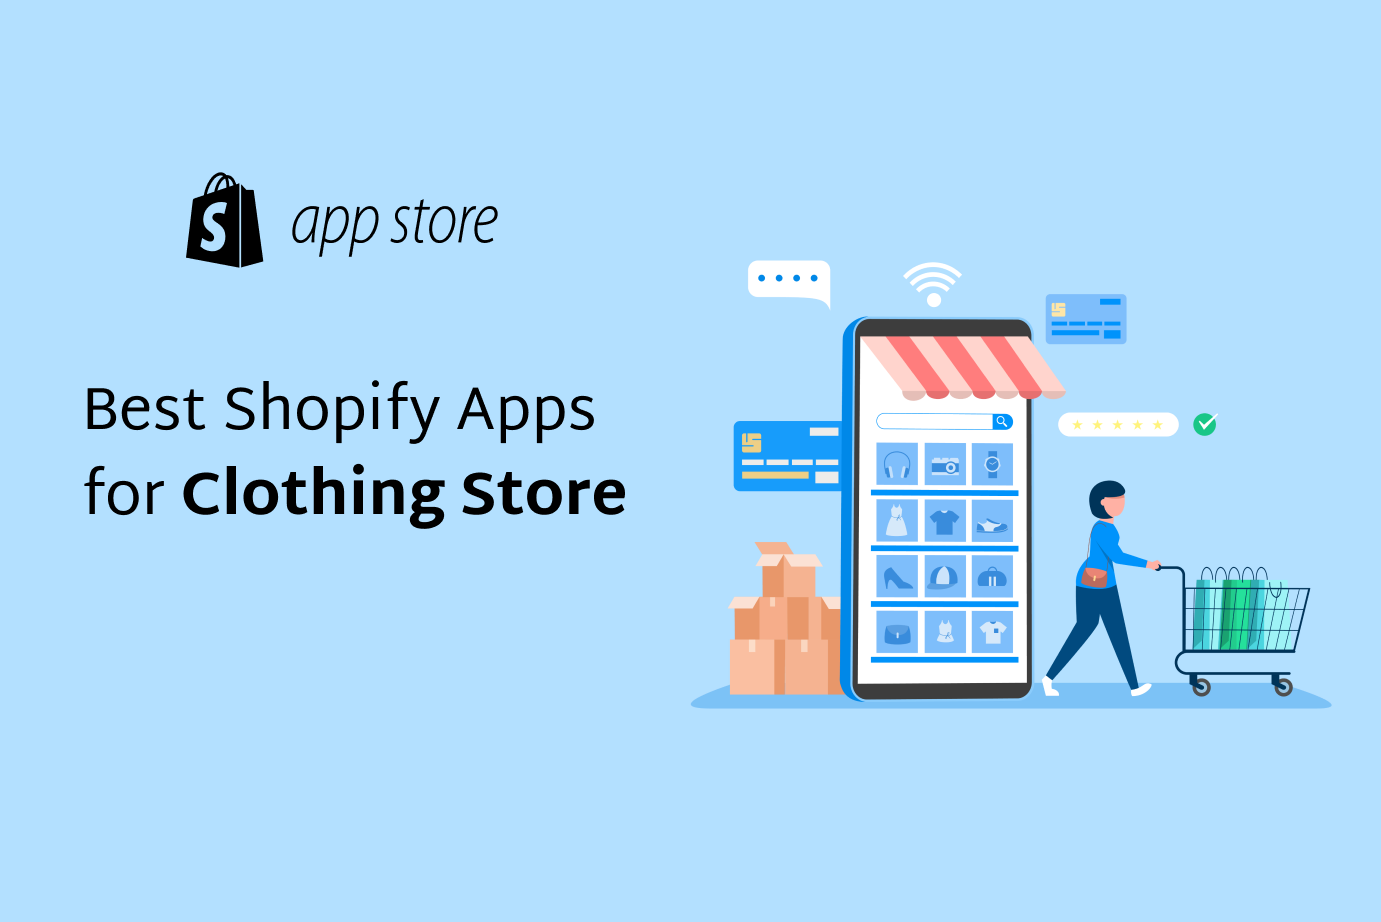 Best Shopify Apps for Clothing Store